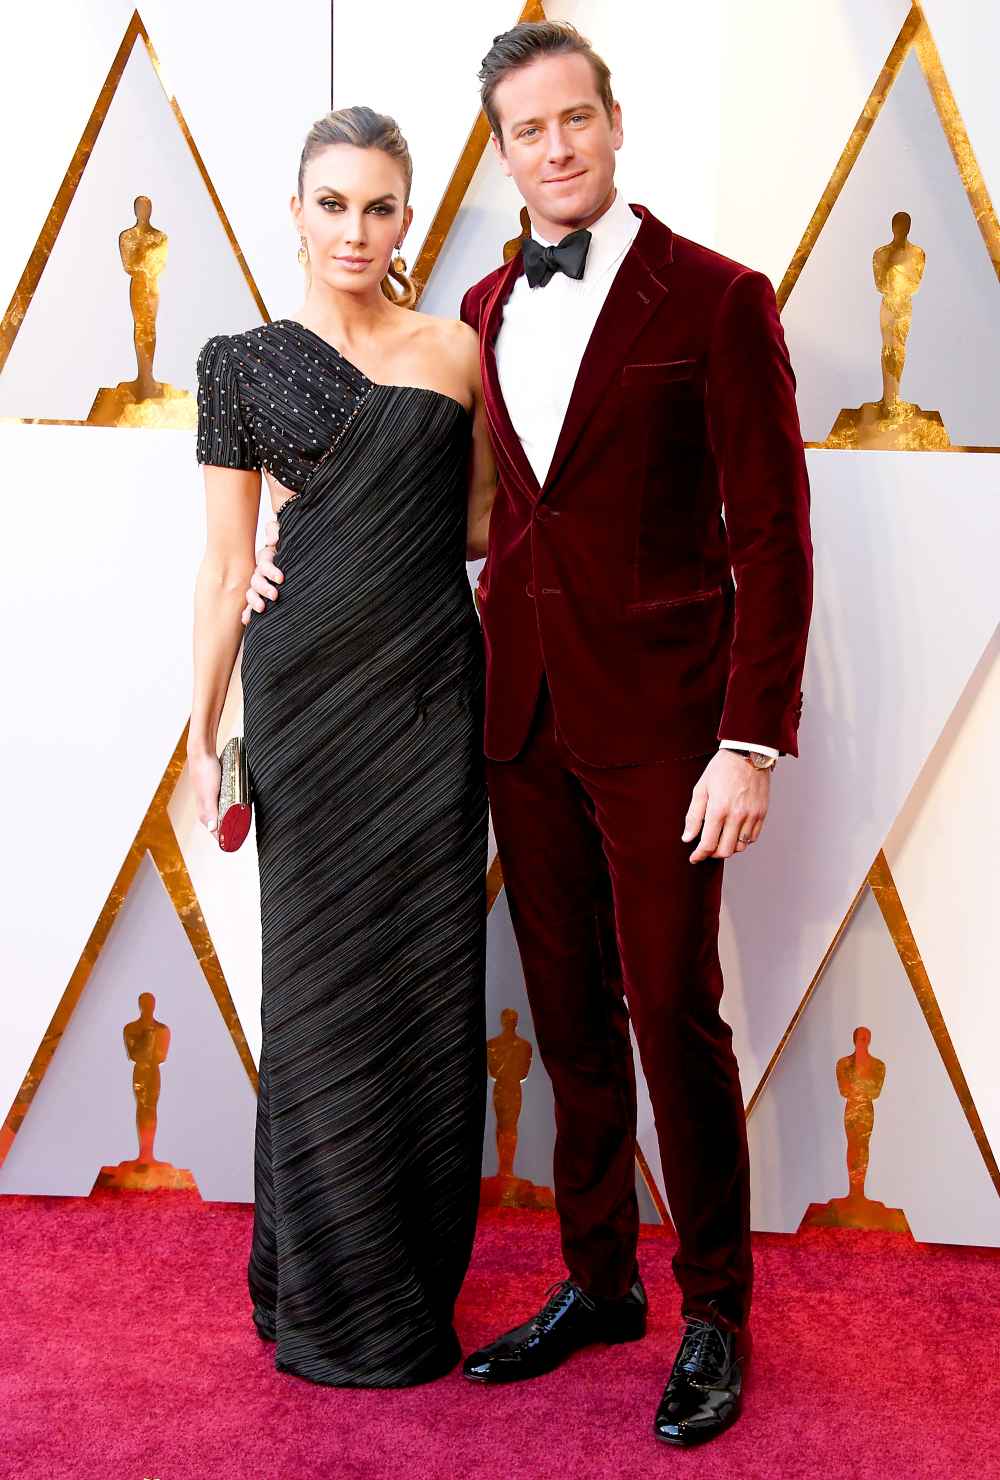 Elizabeth Chambers and Armie Hammer attend the 90th Annual Academy Awards at Hollywood & Highland Center on March 4, 2018 in Hollywood, California.